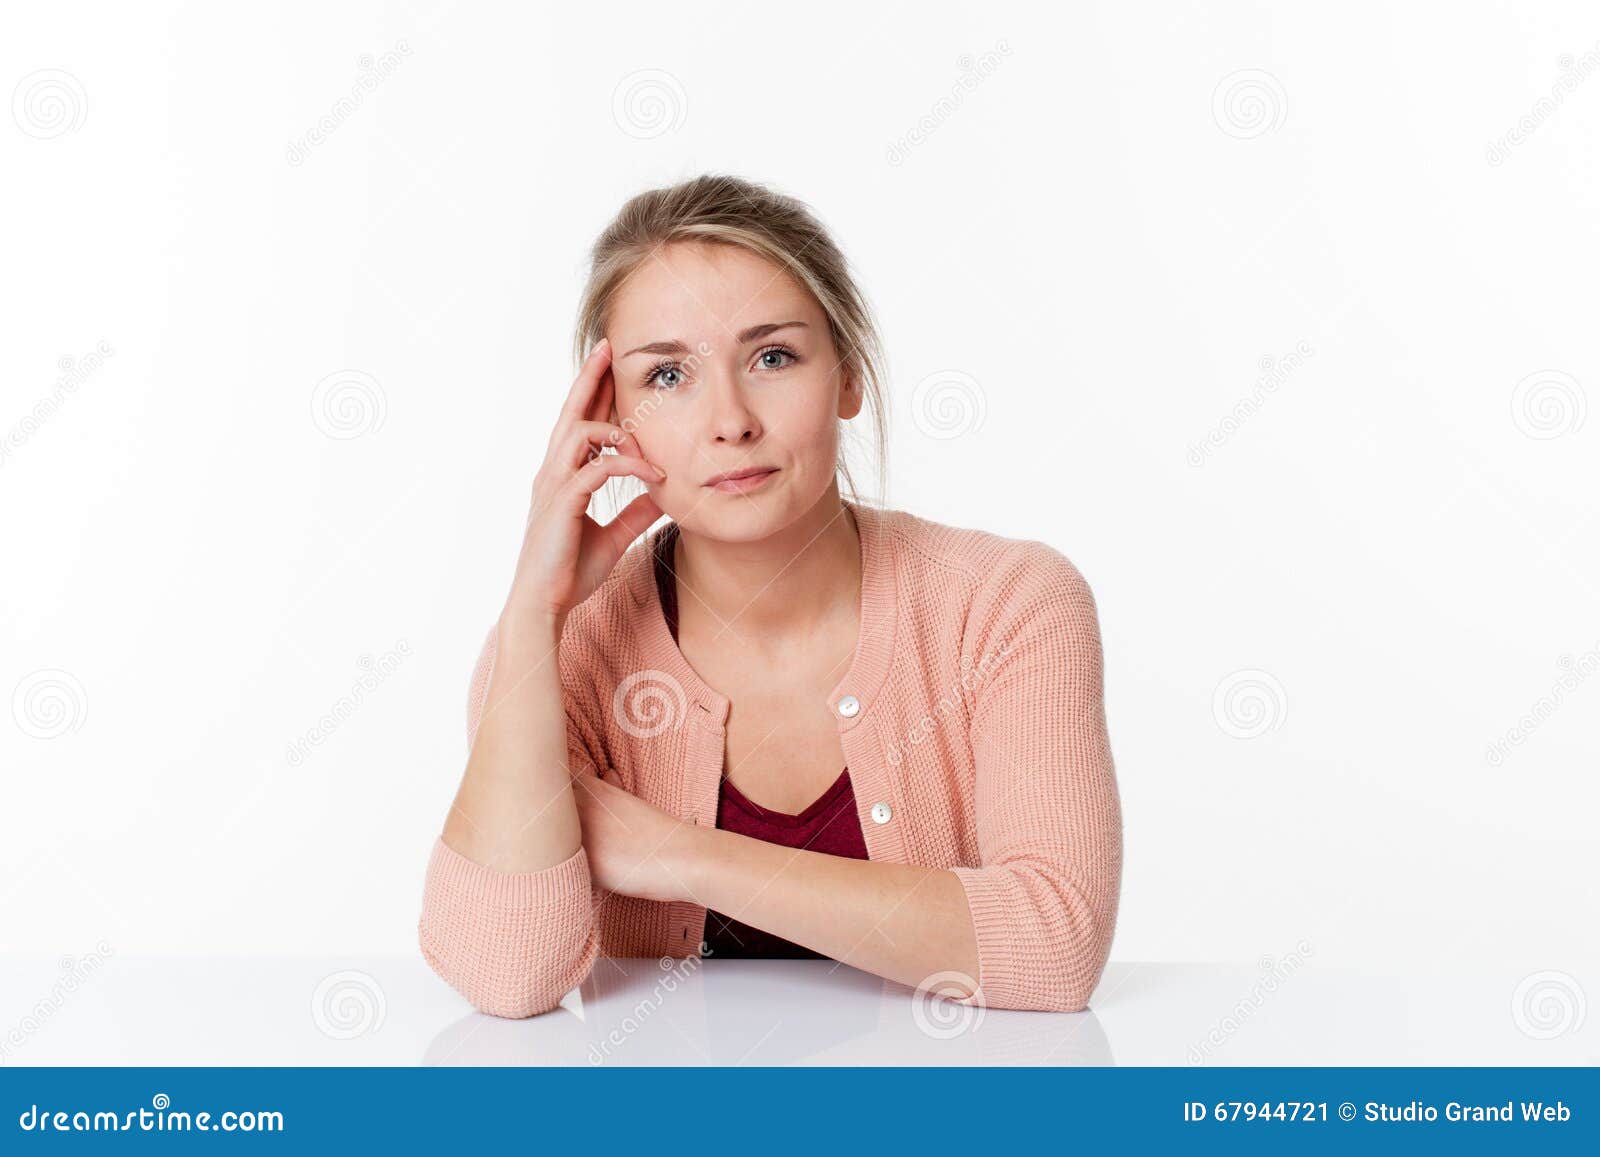 woman sitting at sparse desk for patience and quietness